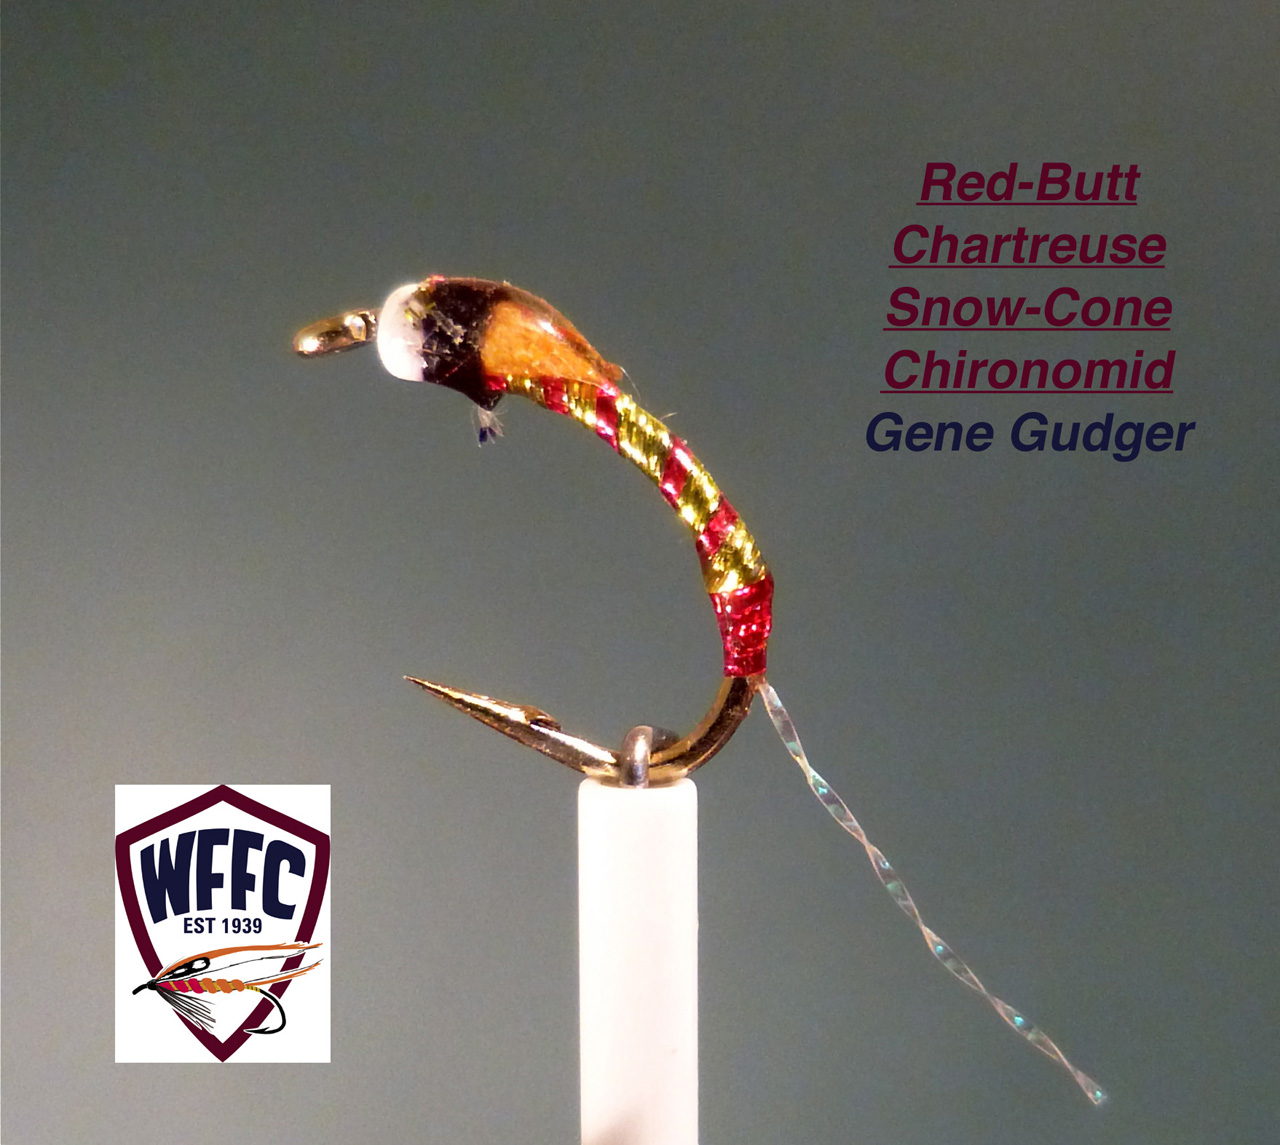 Red-Butt Chartreuse Snow-Cone Chironomid